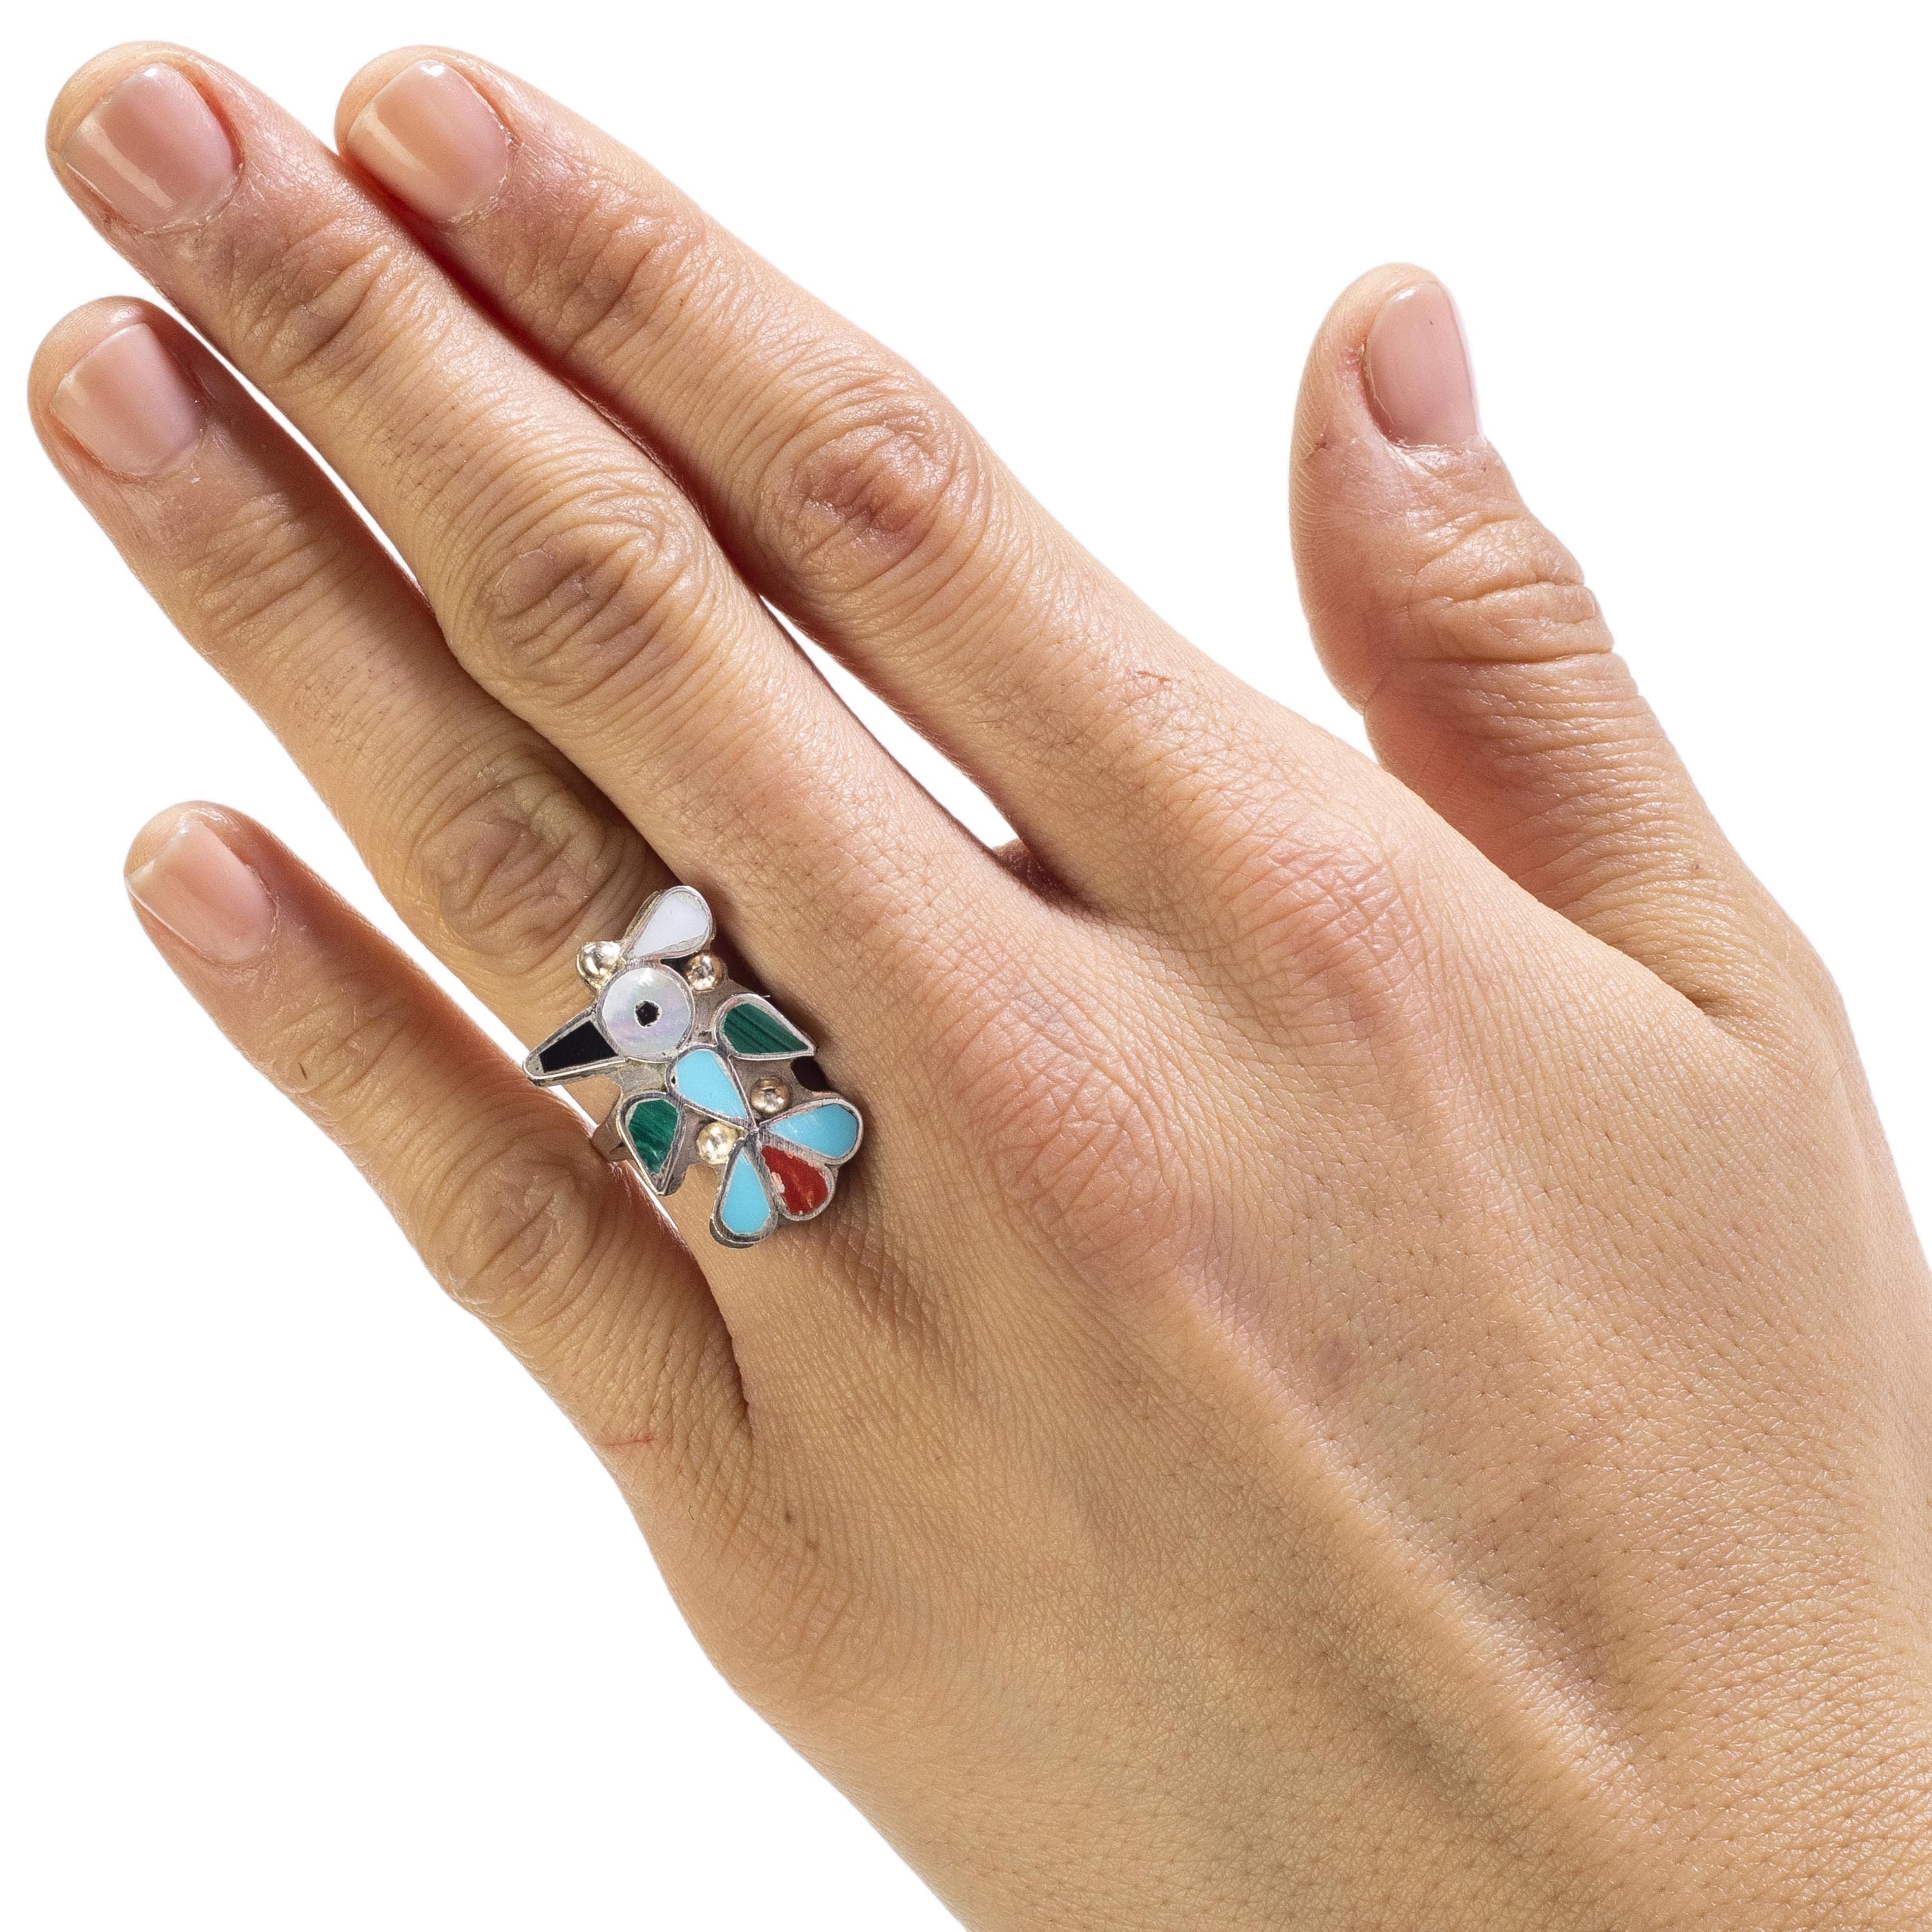 Kalifano Native American Jewelry 5.5 Pino Yunie Zuni Peyote Bird with Mother of Pearl, Black Onyx, Coral, Malachite, and Turquoise USA Native American Made 925 Sterling Silver Ring NAR200.024.55